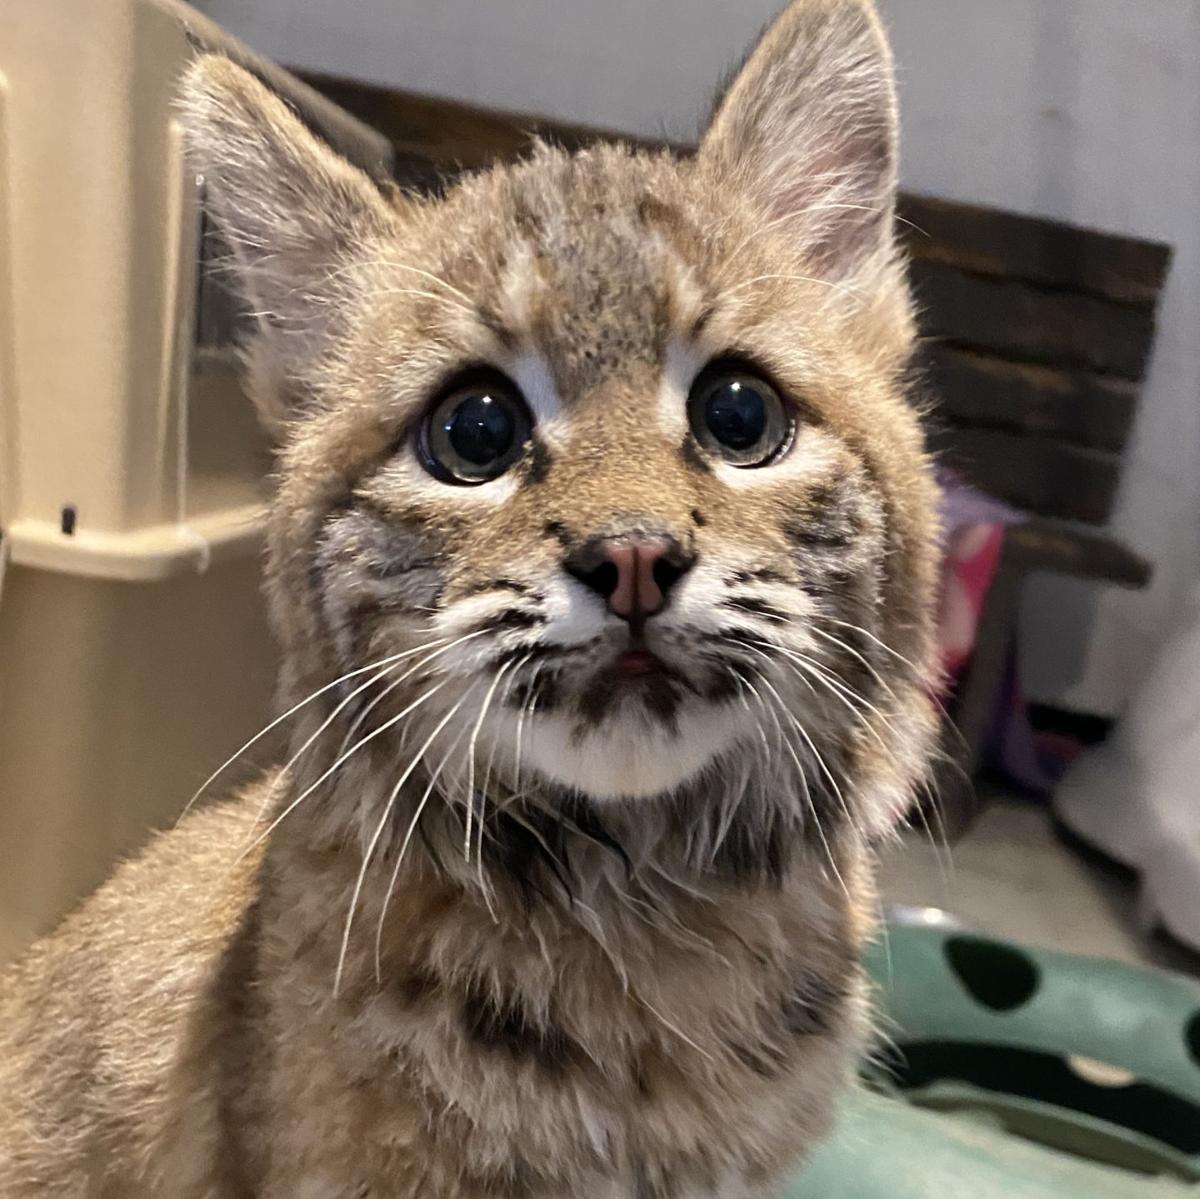 from FWP kitten Bobcat under to transferred Lodge law sanctuary new wildlife Red